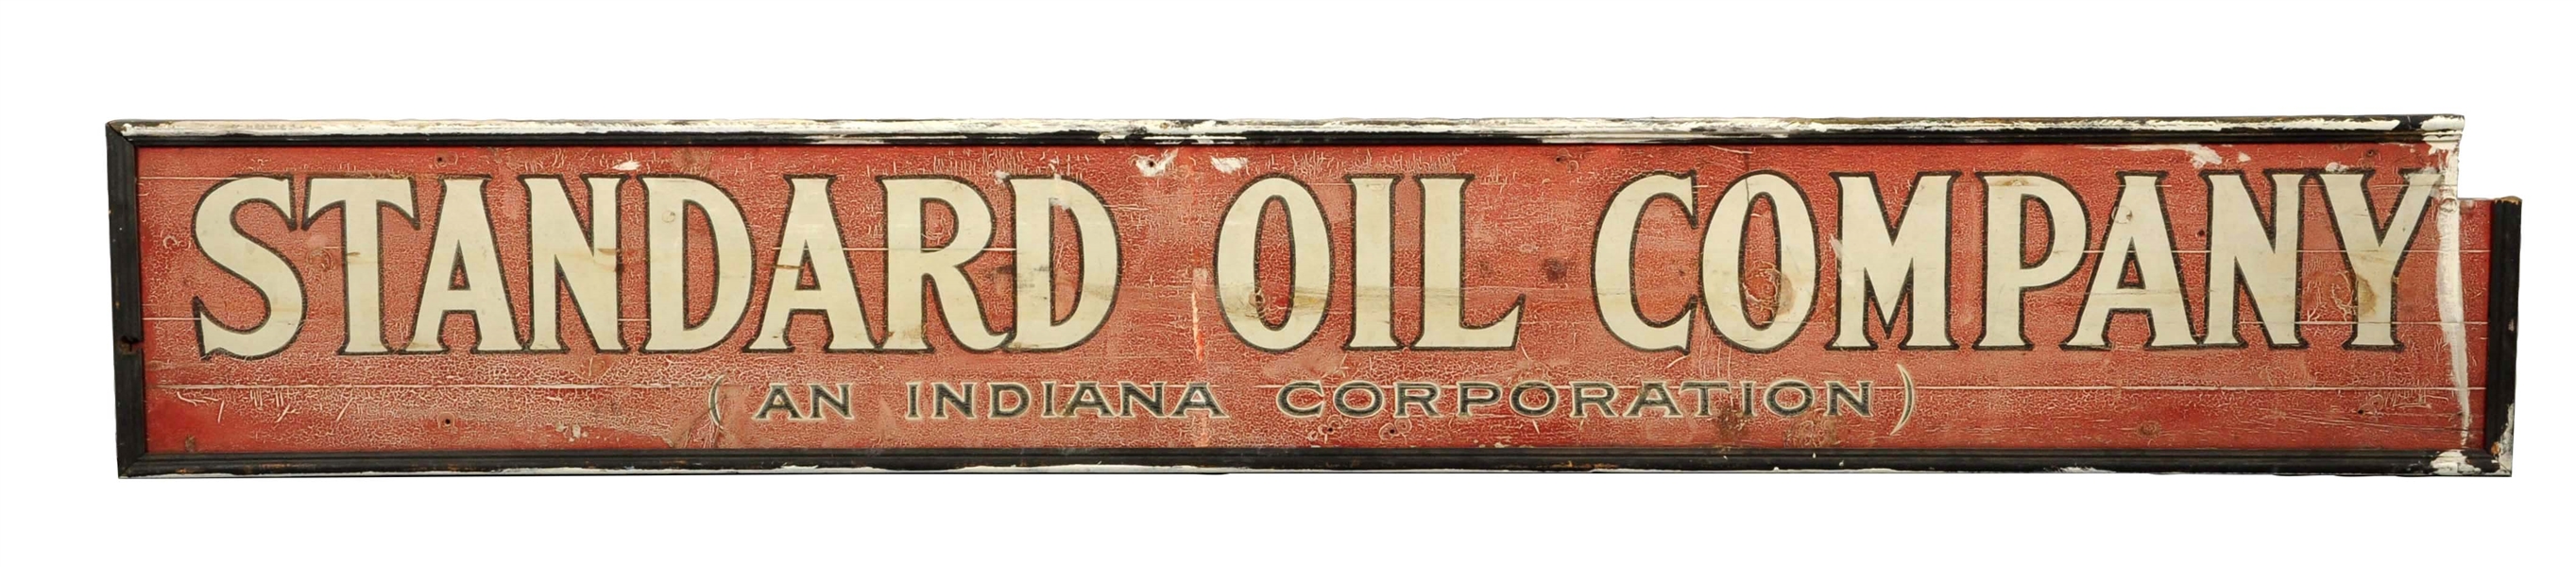 STANDARD OIL COMPANY "AN INDIANA CORPORATION" WOOD SIGN.